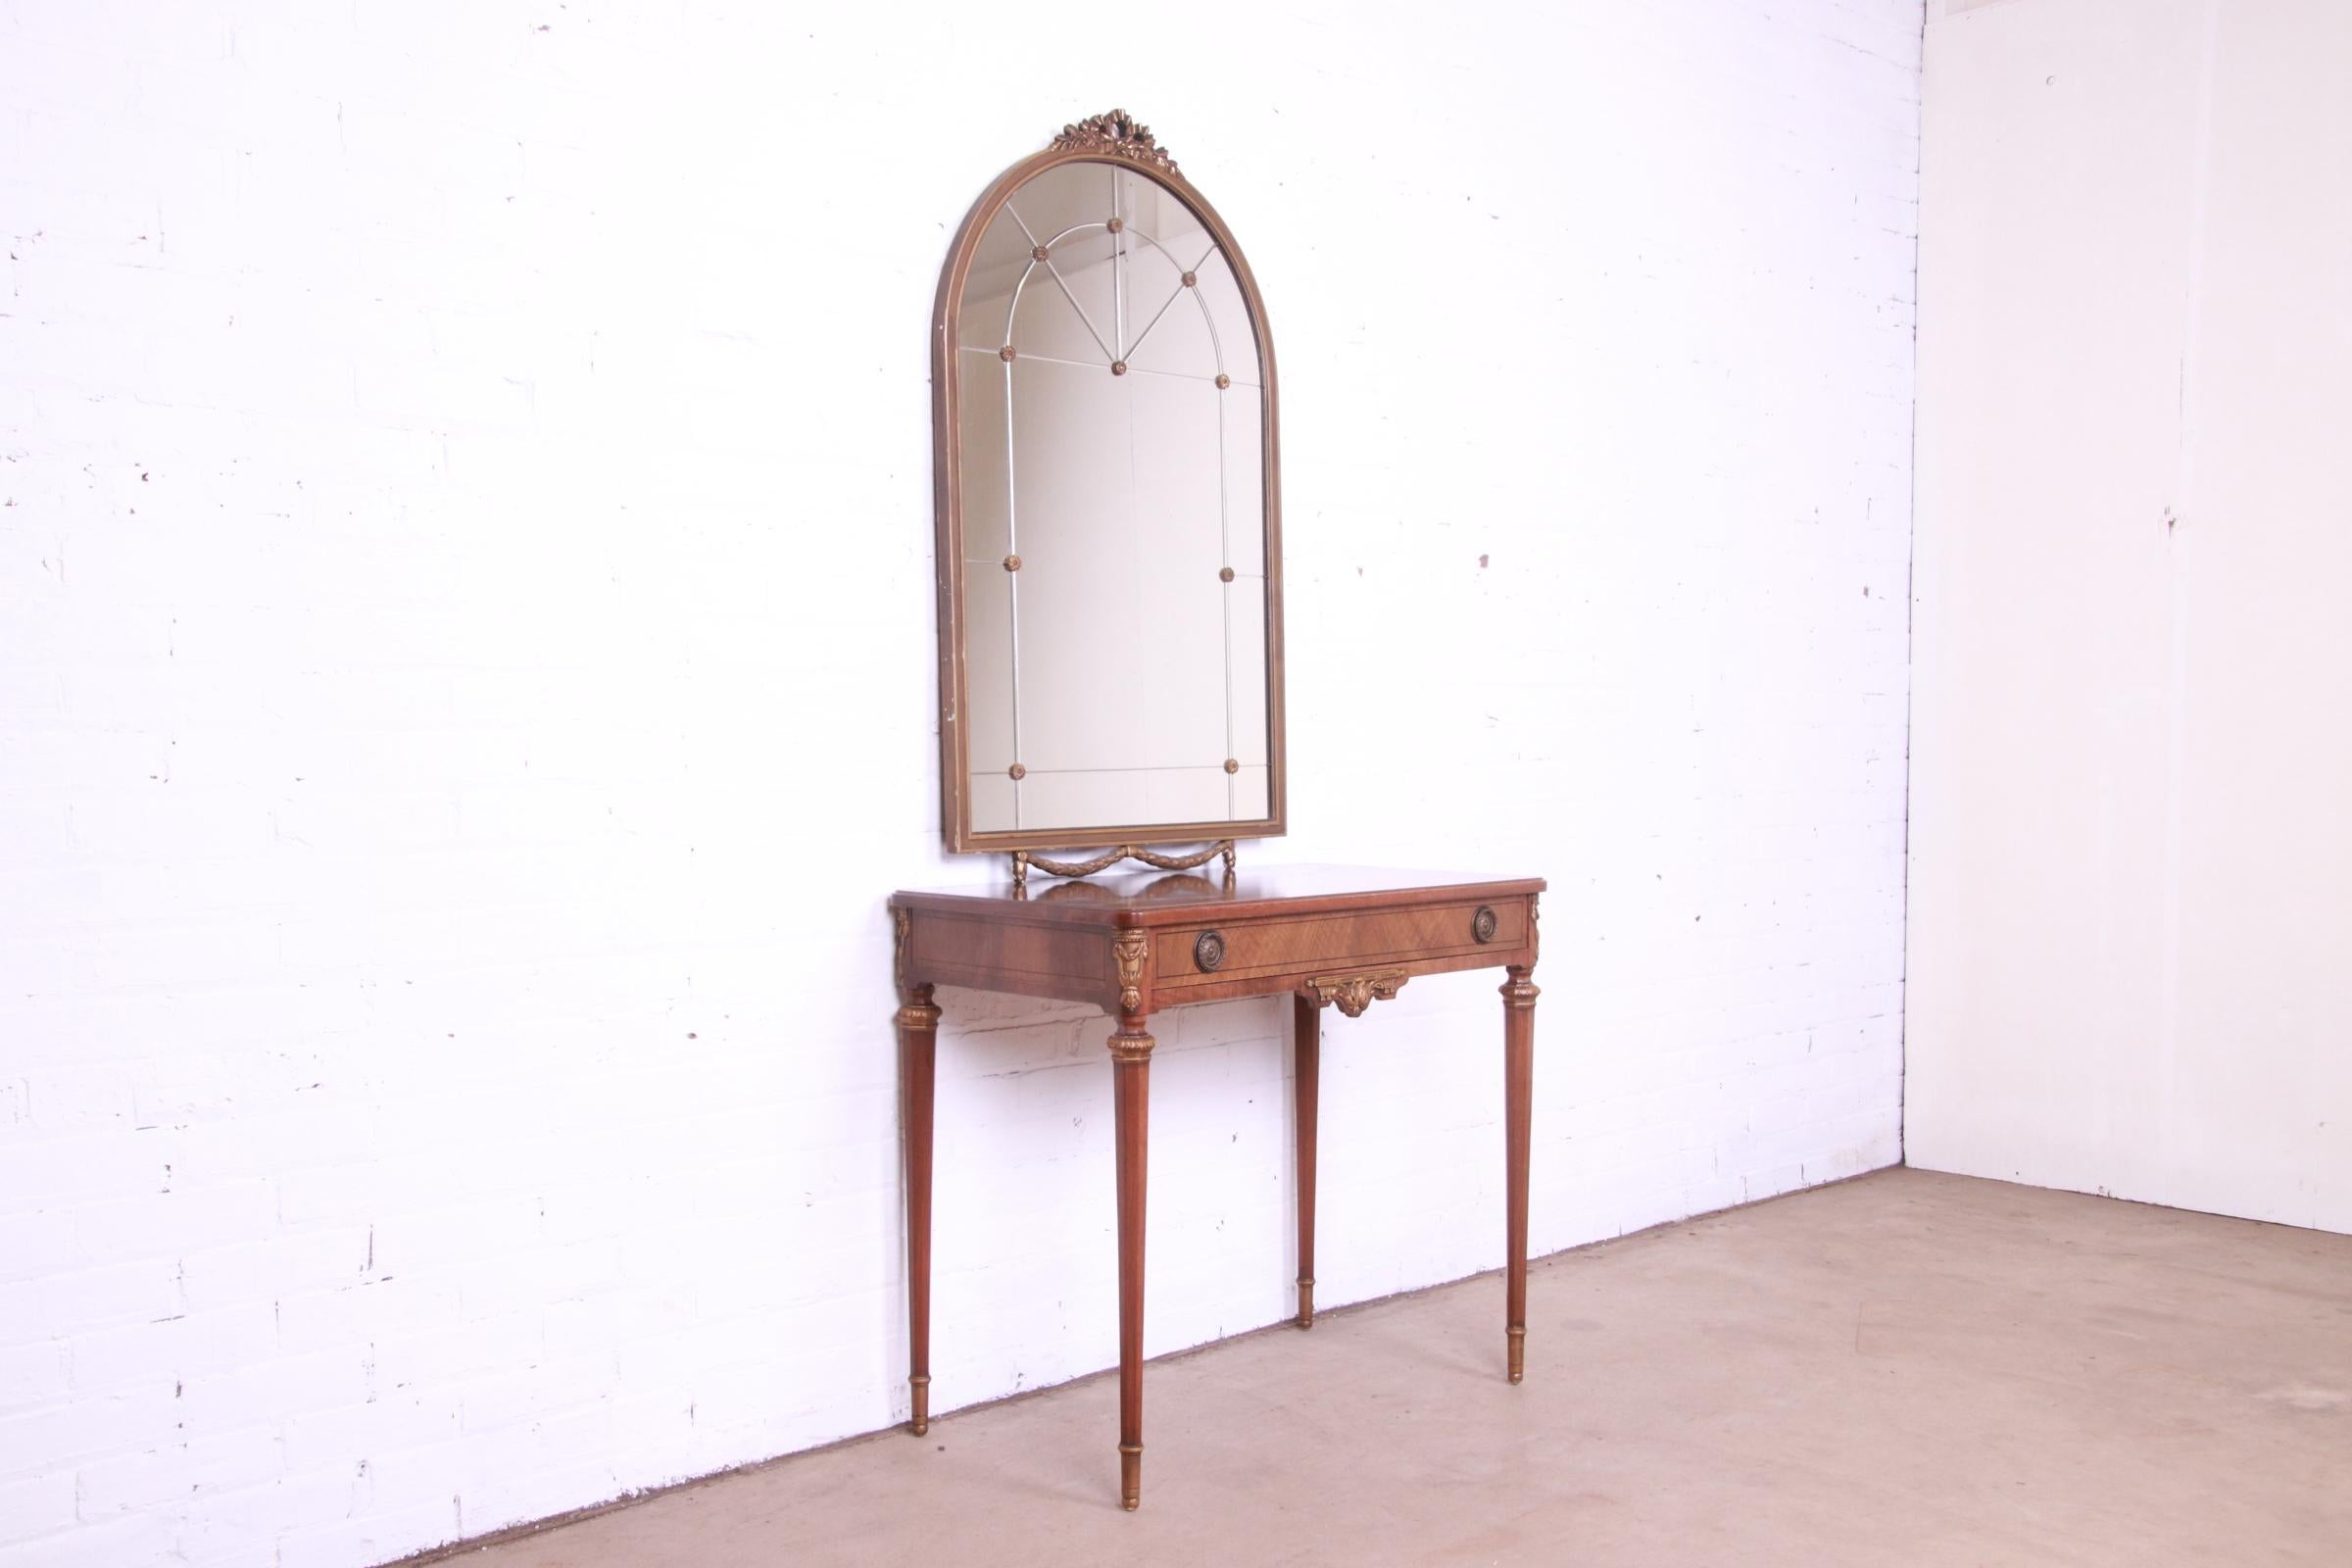 A gorgeous French Regency Louis XVI style vanity or writing desk with wall-hanging mirror

By John Widdicomb

USA, Circa 1920s

Inlaid walnut, with carved giltwood details, and original brass hardware.

Measures:
Desk - 33